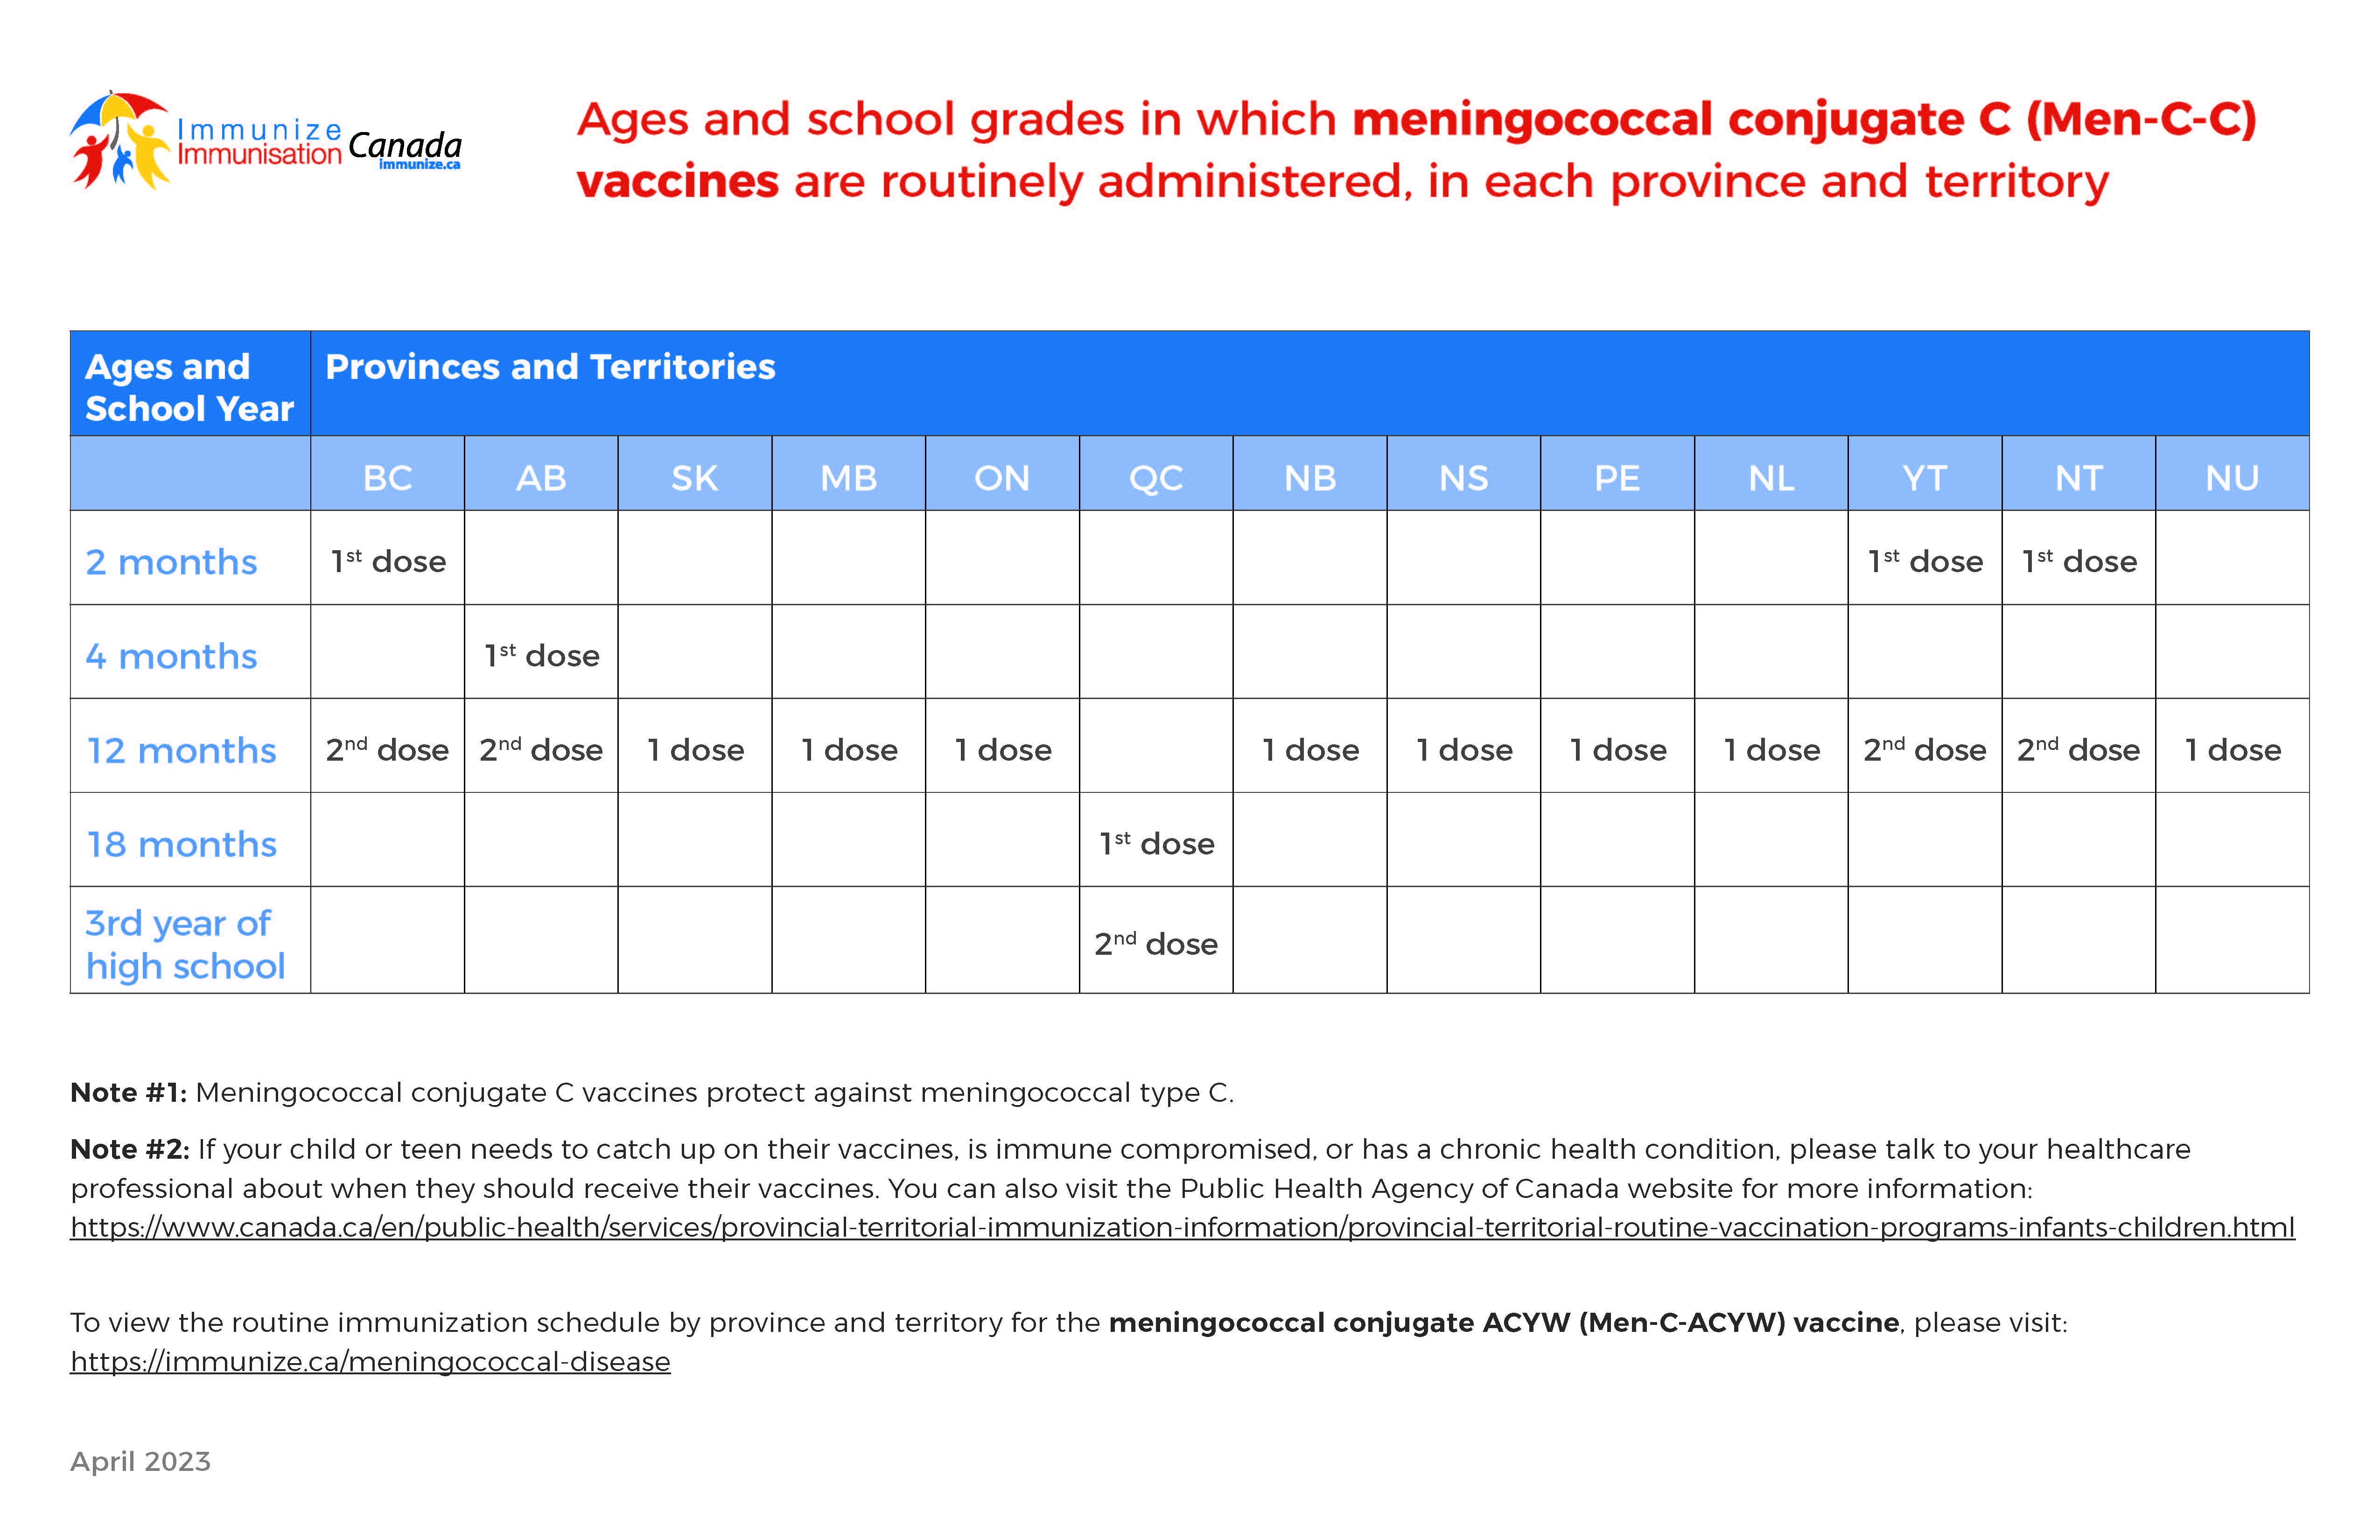 Ages and school grades in which meningococcal conjugate C (Men-C-C) vaccines are routinely administered, in each province and territory